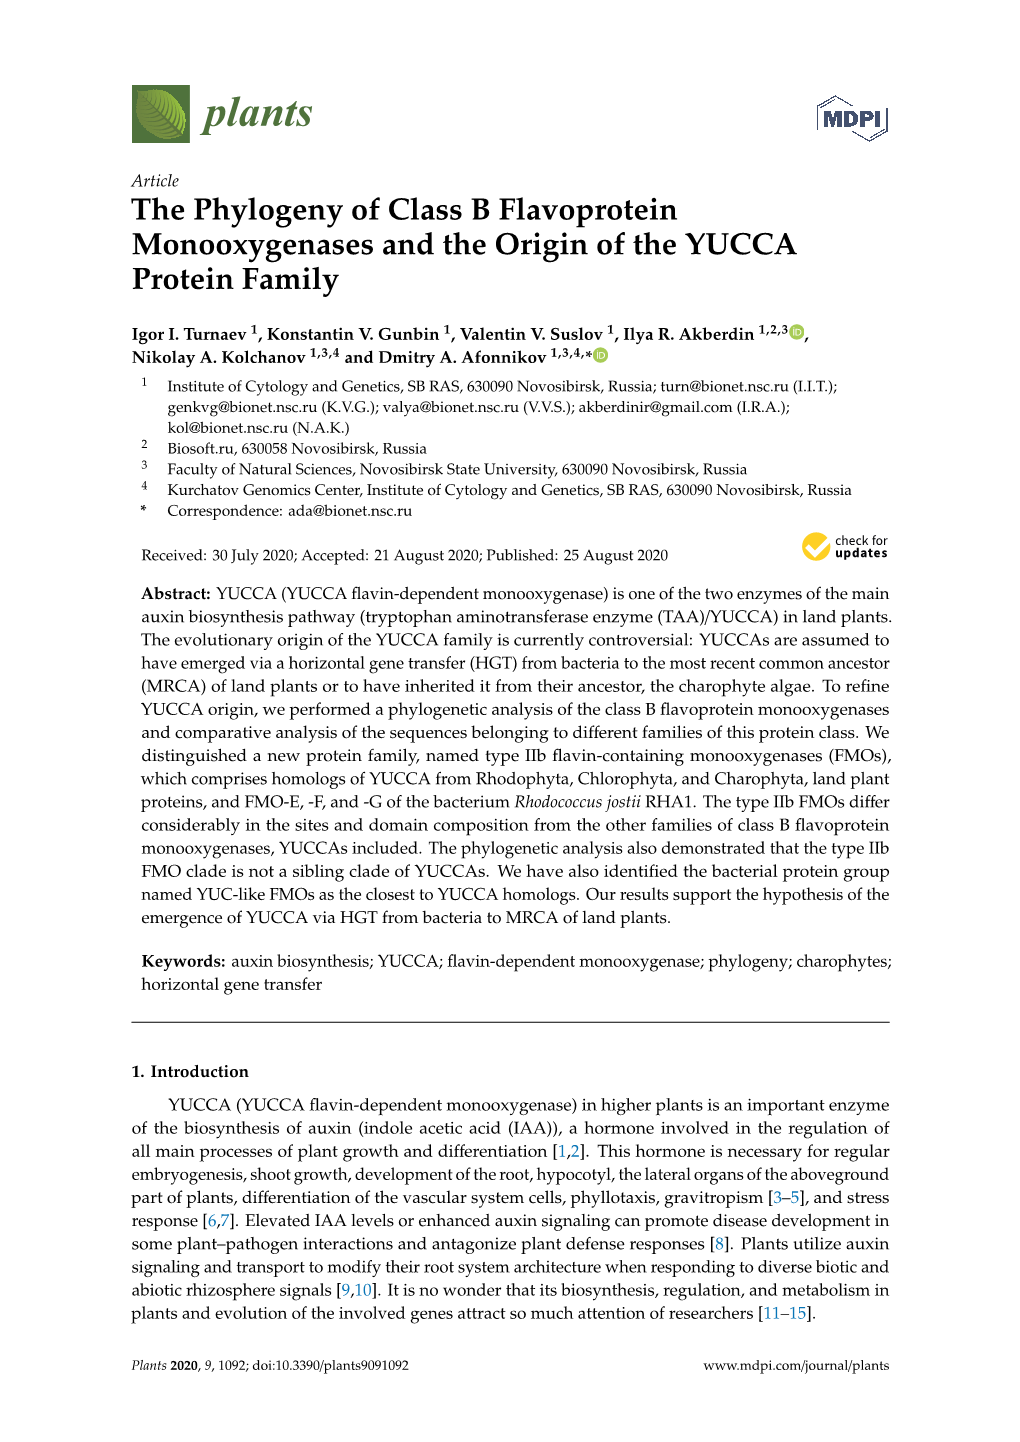 The Phylogeny of Class B Flavoprotein Monooxygenases and the Origin of the YUCCA Protein Family